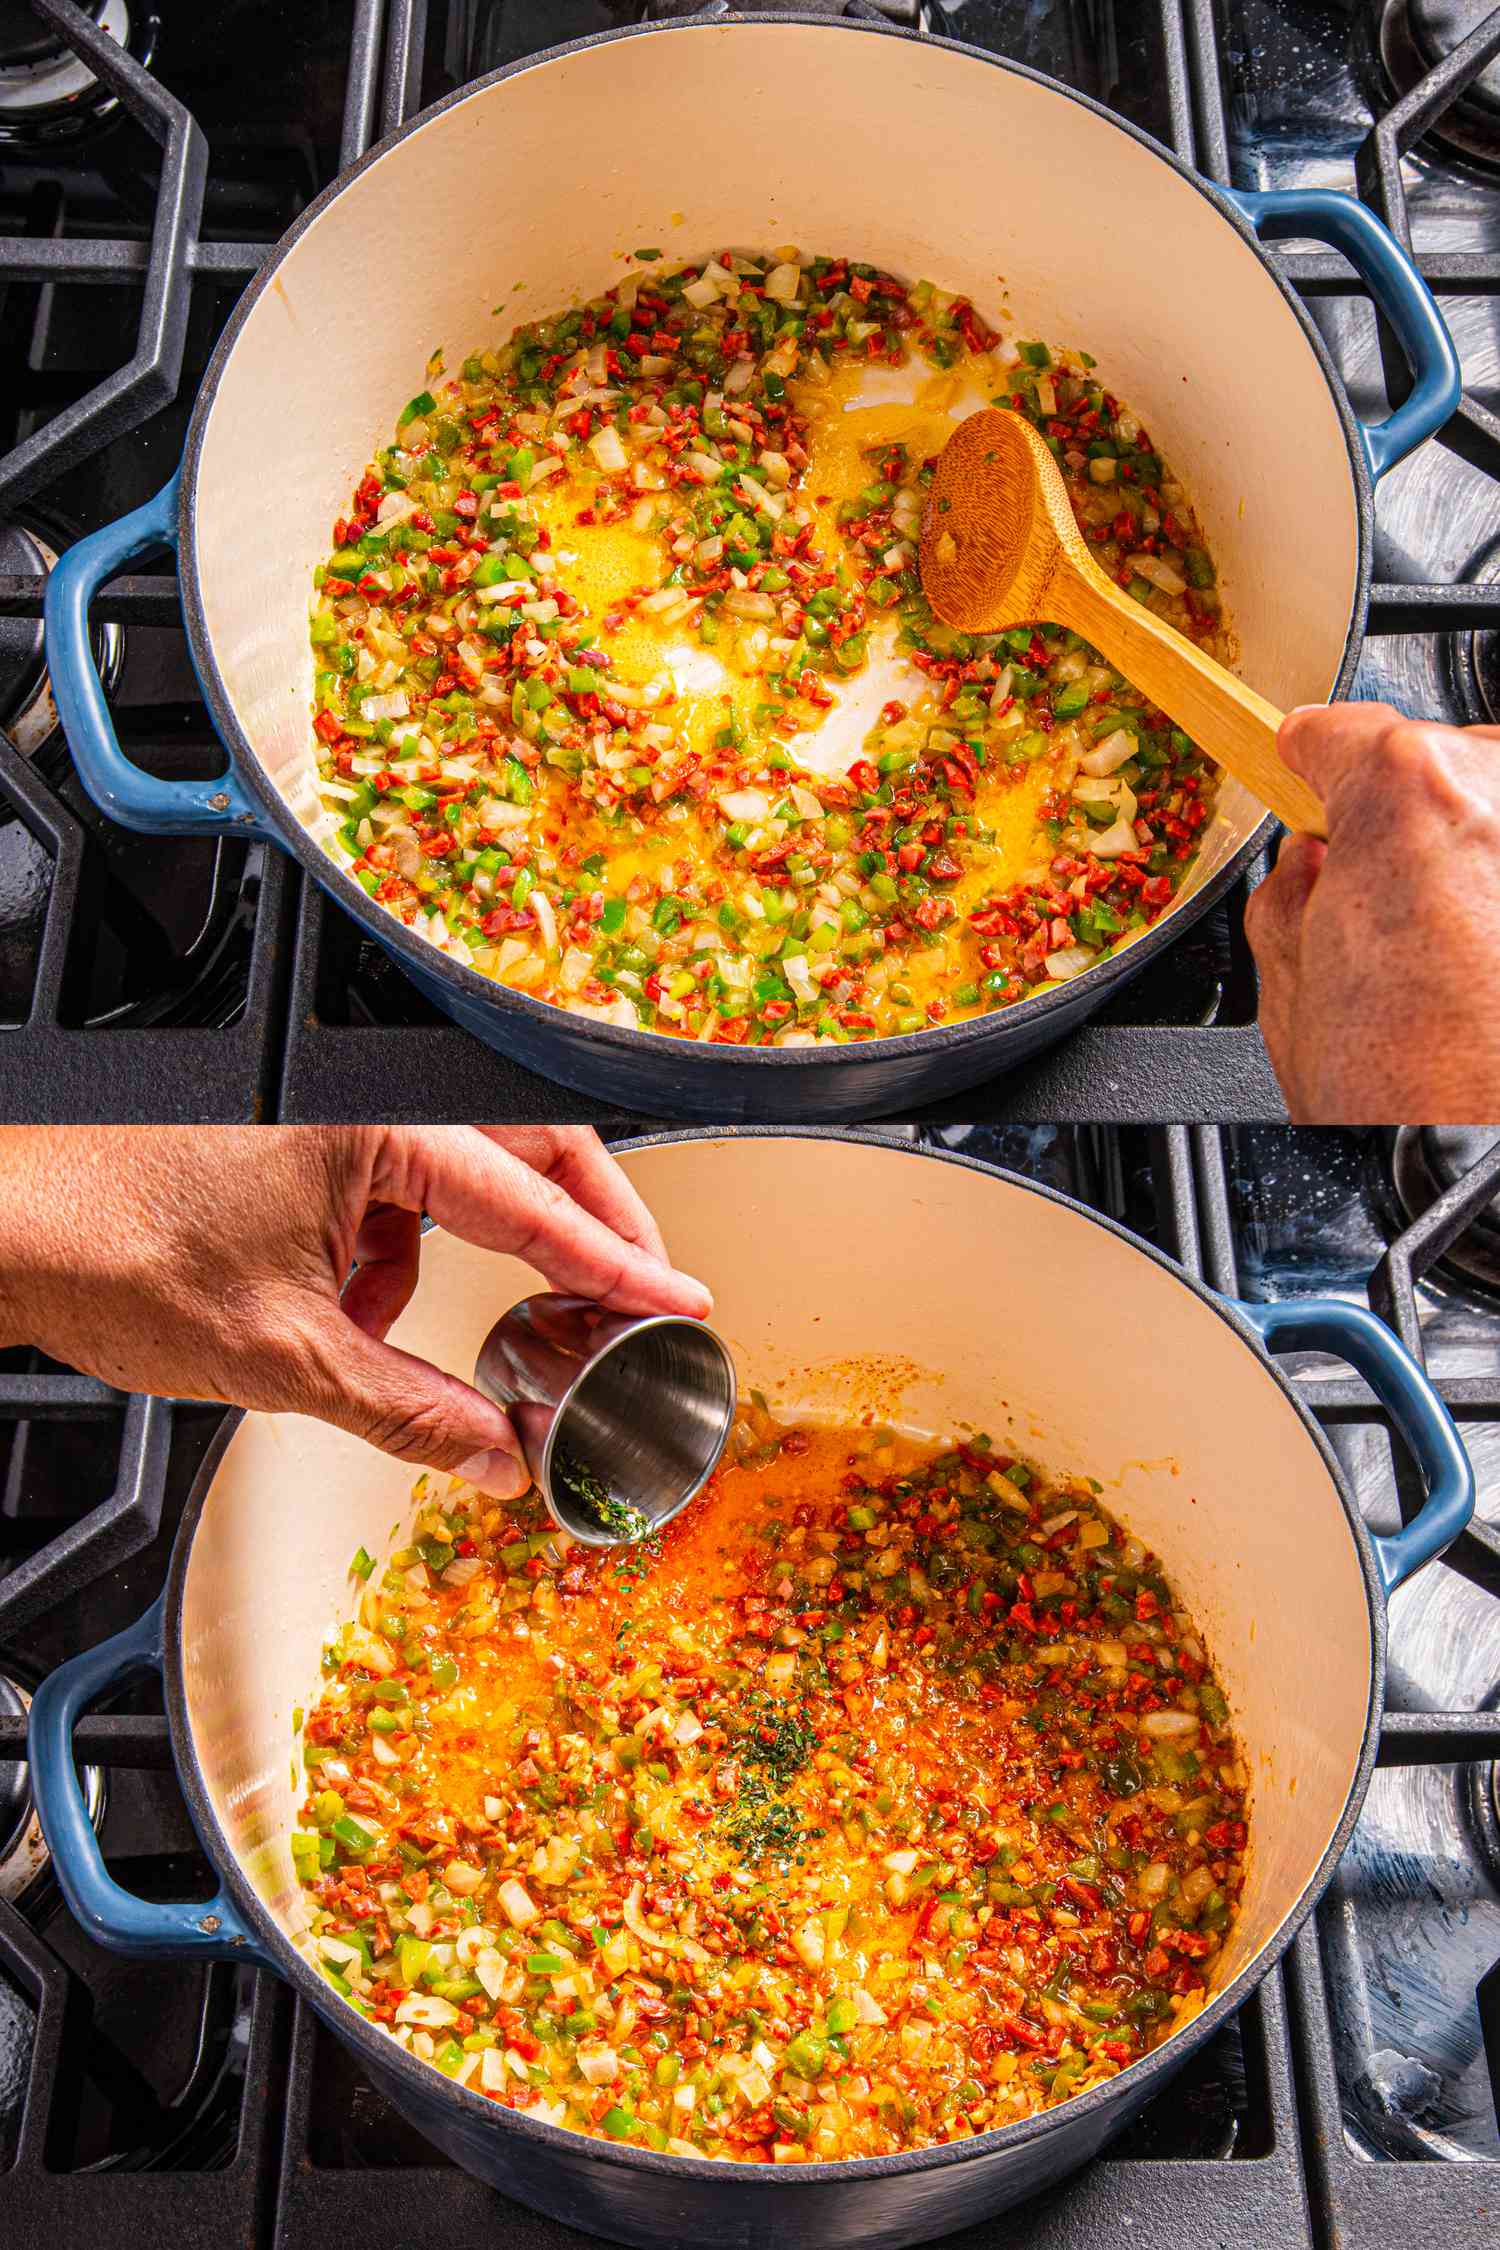 Two image collage of cooking vegetable and chorizo and adding seasoning to it